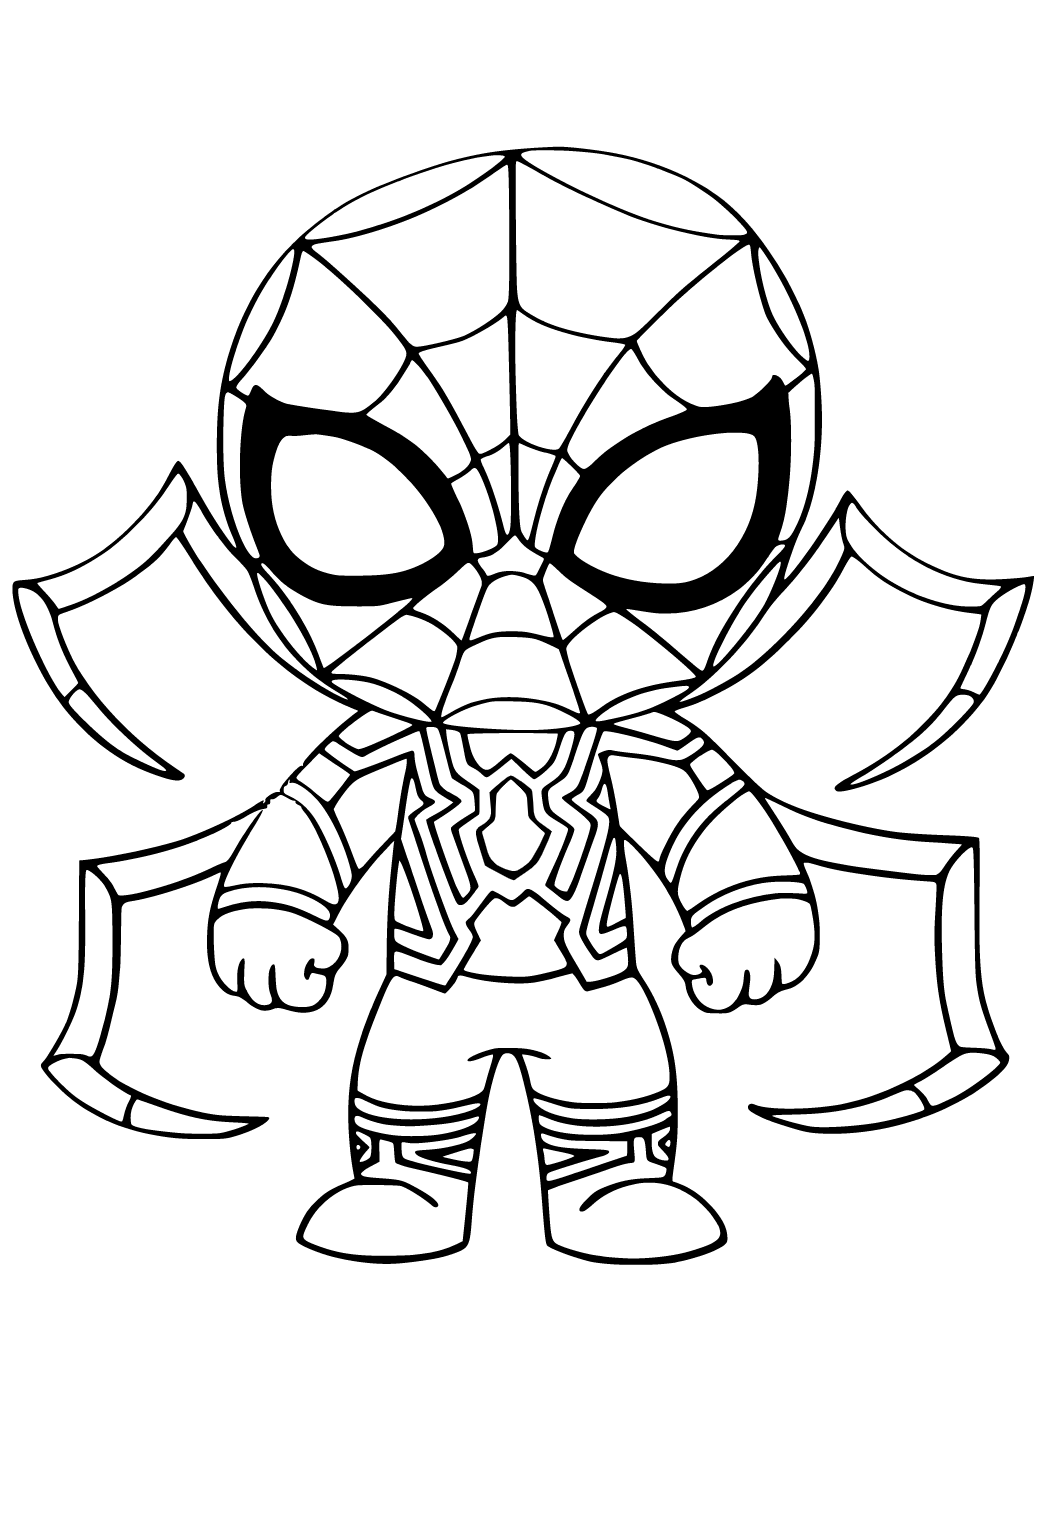 Free Printable Spiderman Baby Coloring Page, Sheet And Picture For Adults  And Kids (Girls And Boys)  - Coloring Home